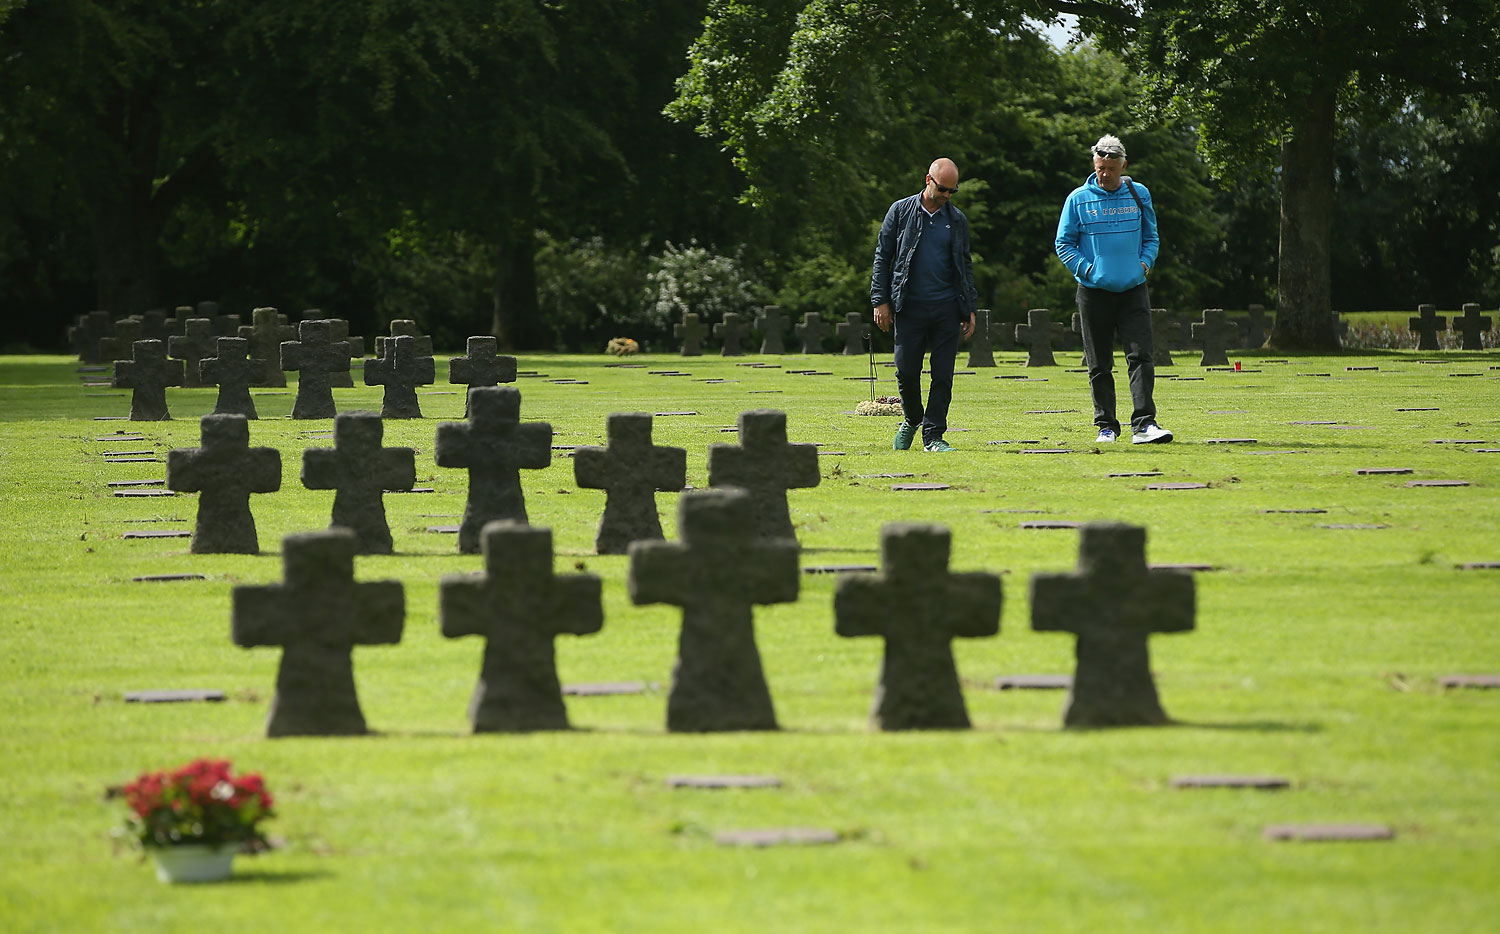 Visitors walk among gravestones at the German Cemetery where approximately 21,000 German World War II soldiers are buried on June 5, 2014 at La Cambe, France.